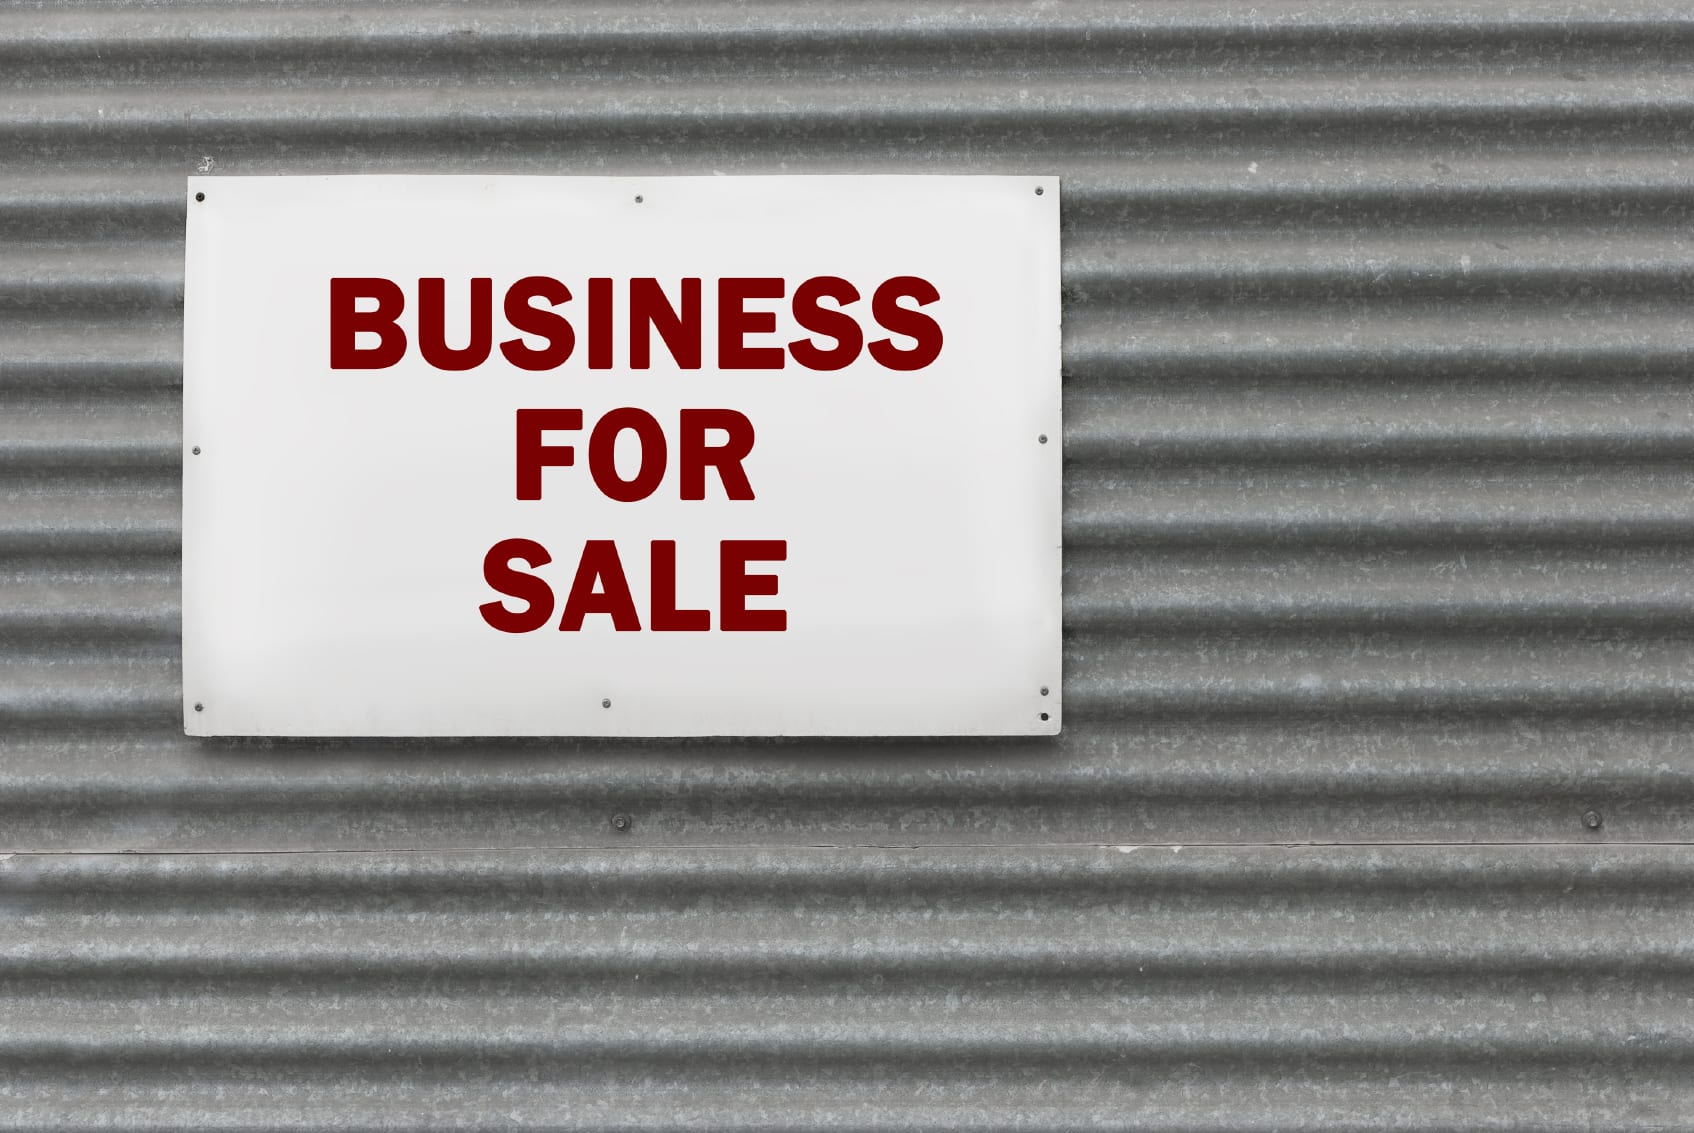 10 Important Steps to Selling a Business